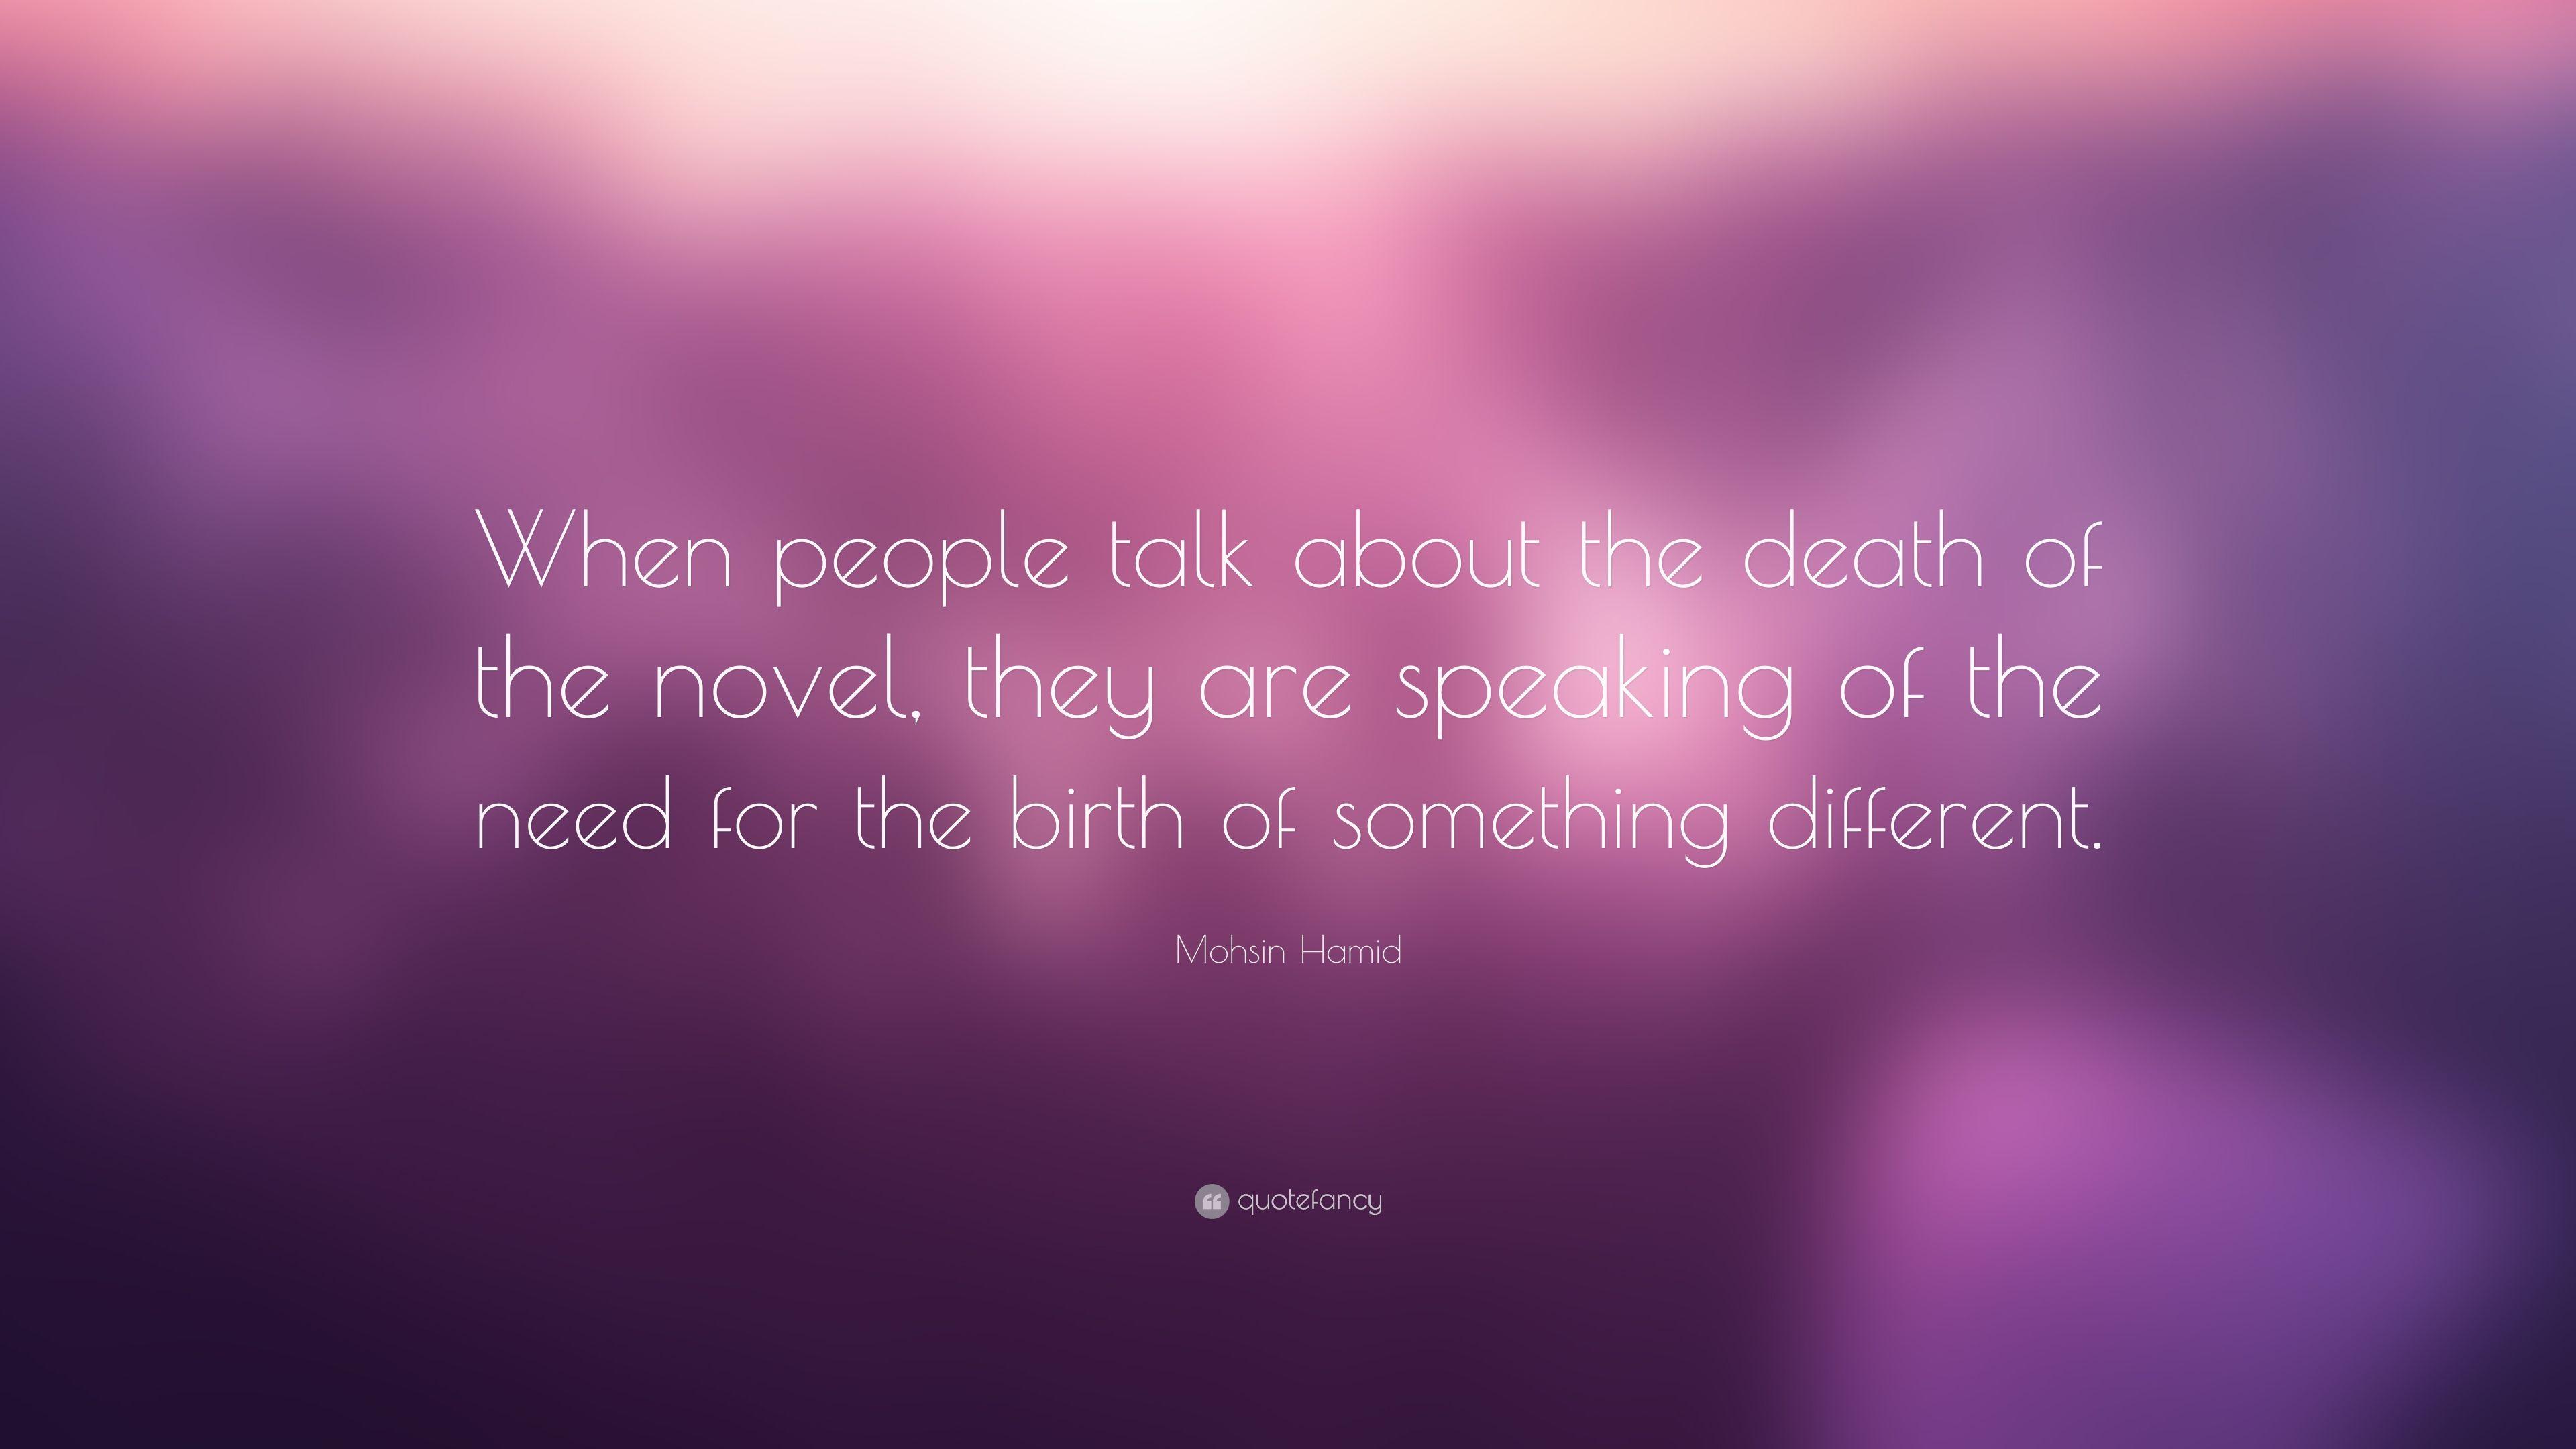 Mohsin Hamid Quote: “When people talk about the death of the novel